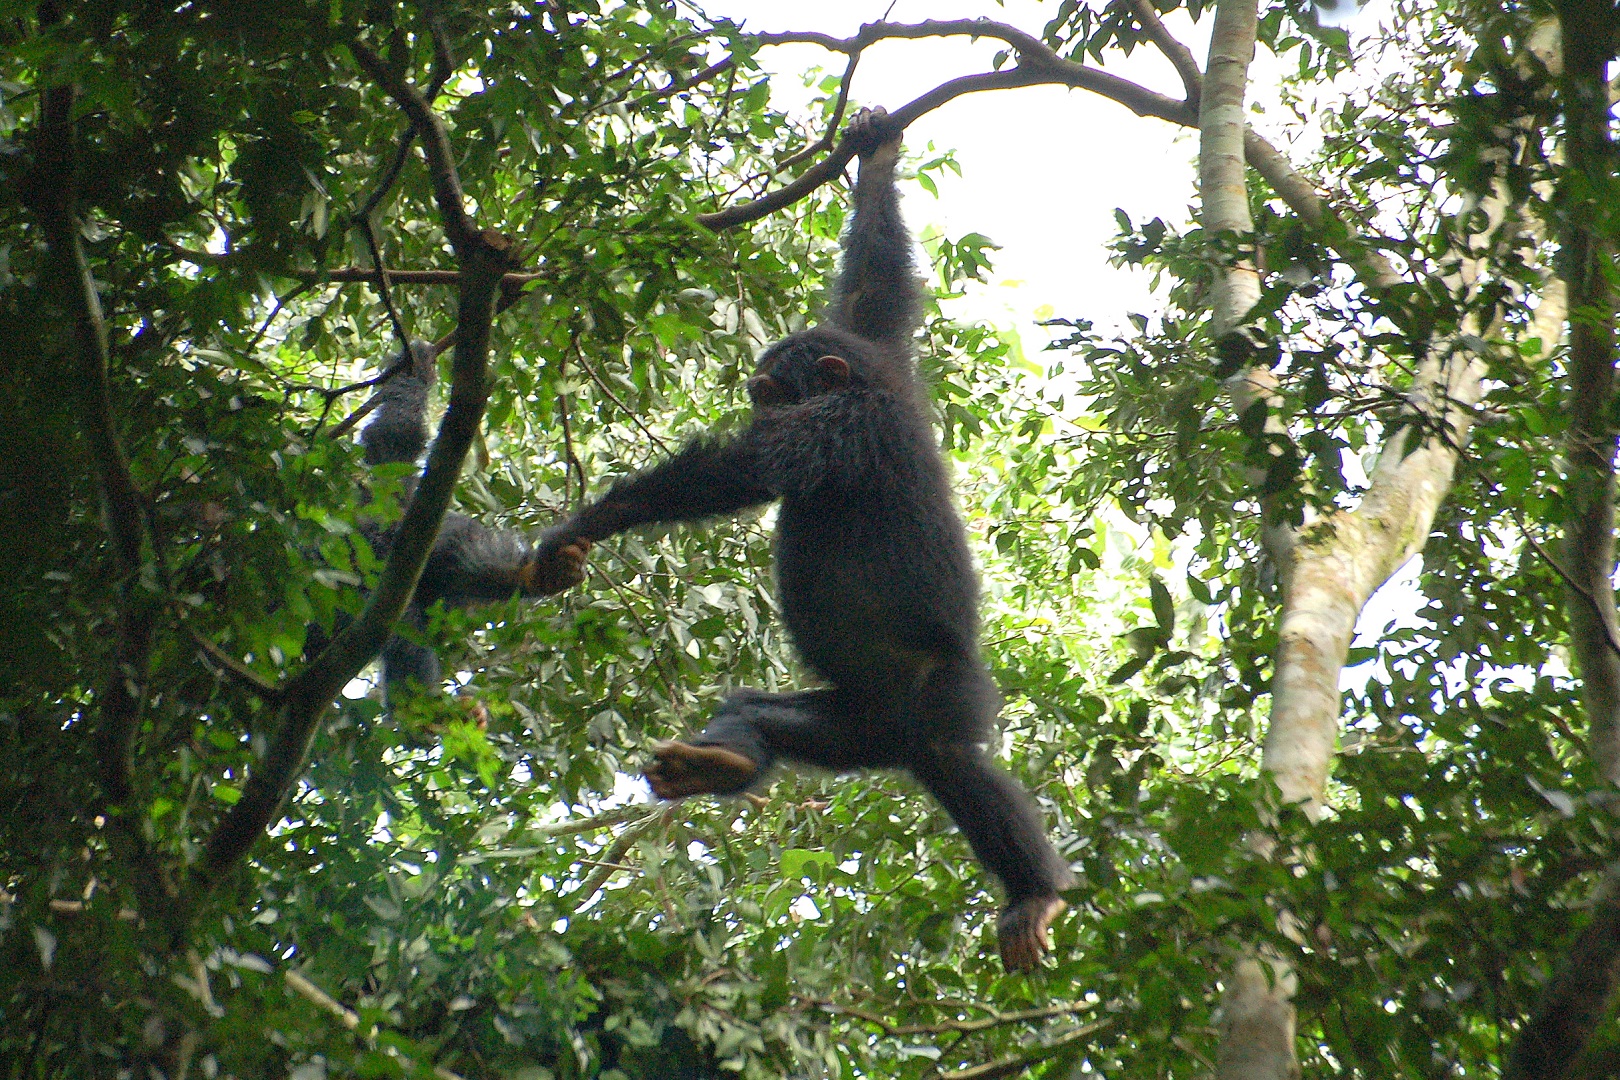 Playful chimpanzee flying on top of a tree in Kyambura Gorge